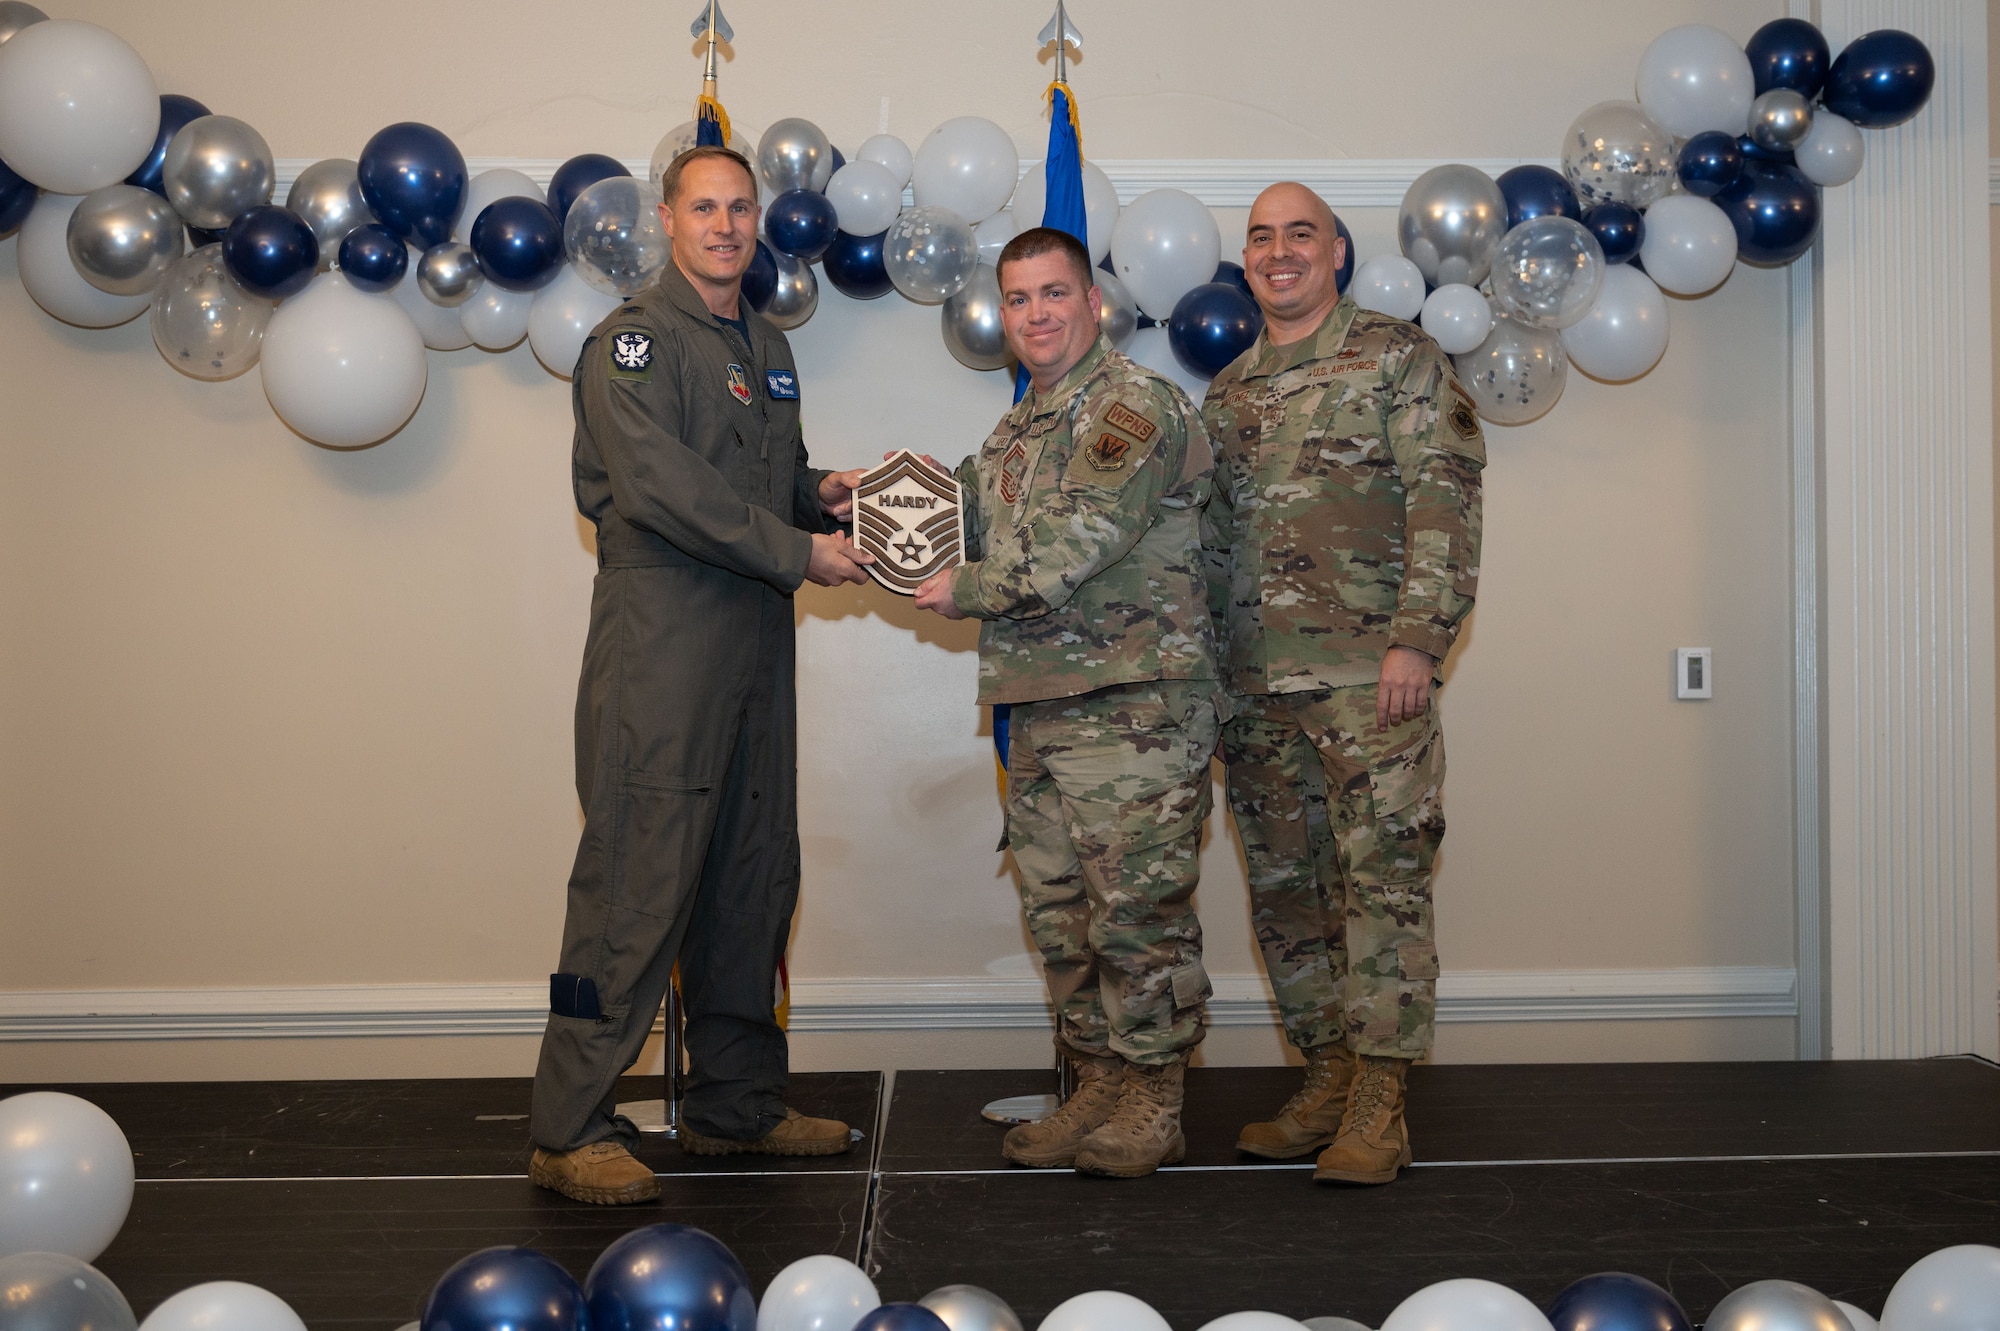 Col. Lucas Teel, 4th Fighter Wing commander, and Chief Master Sgt. Peter Martinez, 4th FW command chief, present a plaque to Senior Master Sgt. select Benjamin Hardy, 333rd Fighter Squadron weapons section chief, during the senior master sergeant release ceremony at Seymour Johnson Air Force Base, North Carolina, March 17, 2023. Air Force officials selected 1,629 master sergeants for promotion to senior master sergeant, out of 16,031 eligible, for a selection rate of 10 percent this promotion cycle. (U.S. Air Force photo by Airman 1st Class Rebecca Sirimarco-Lang)